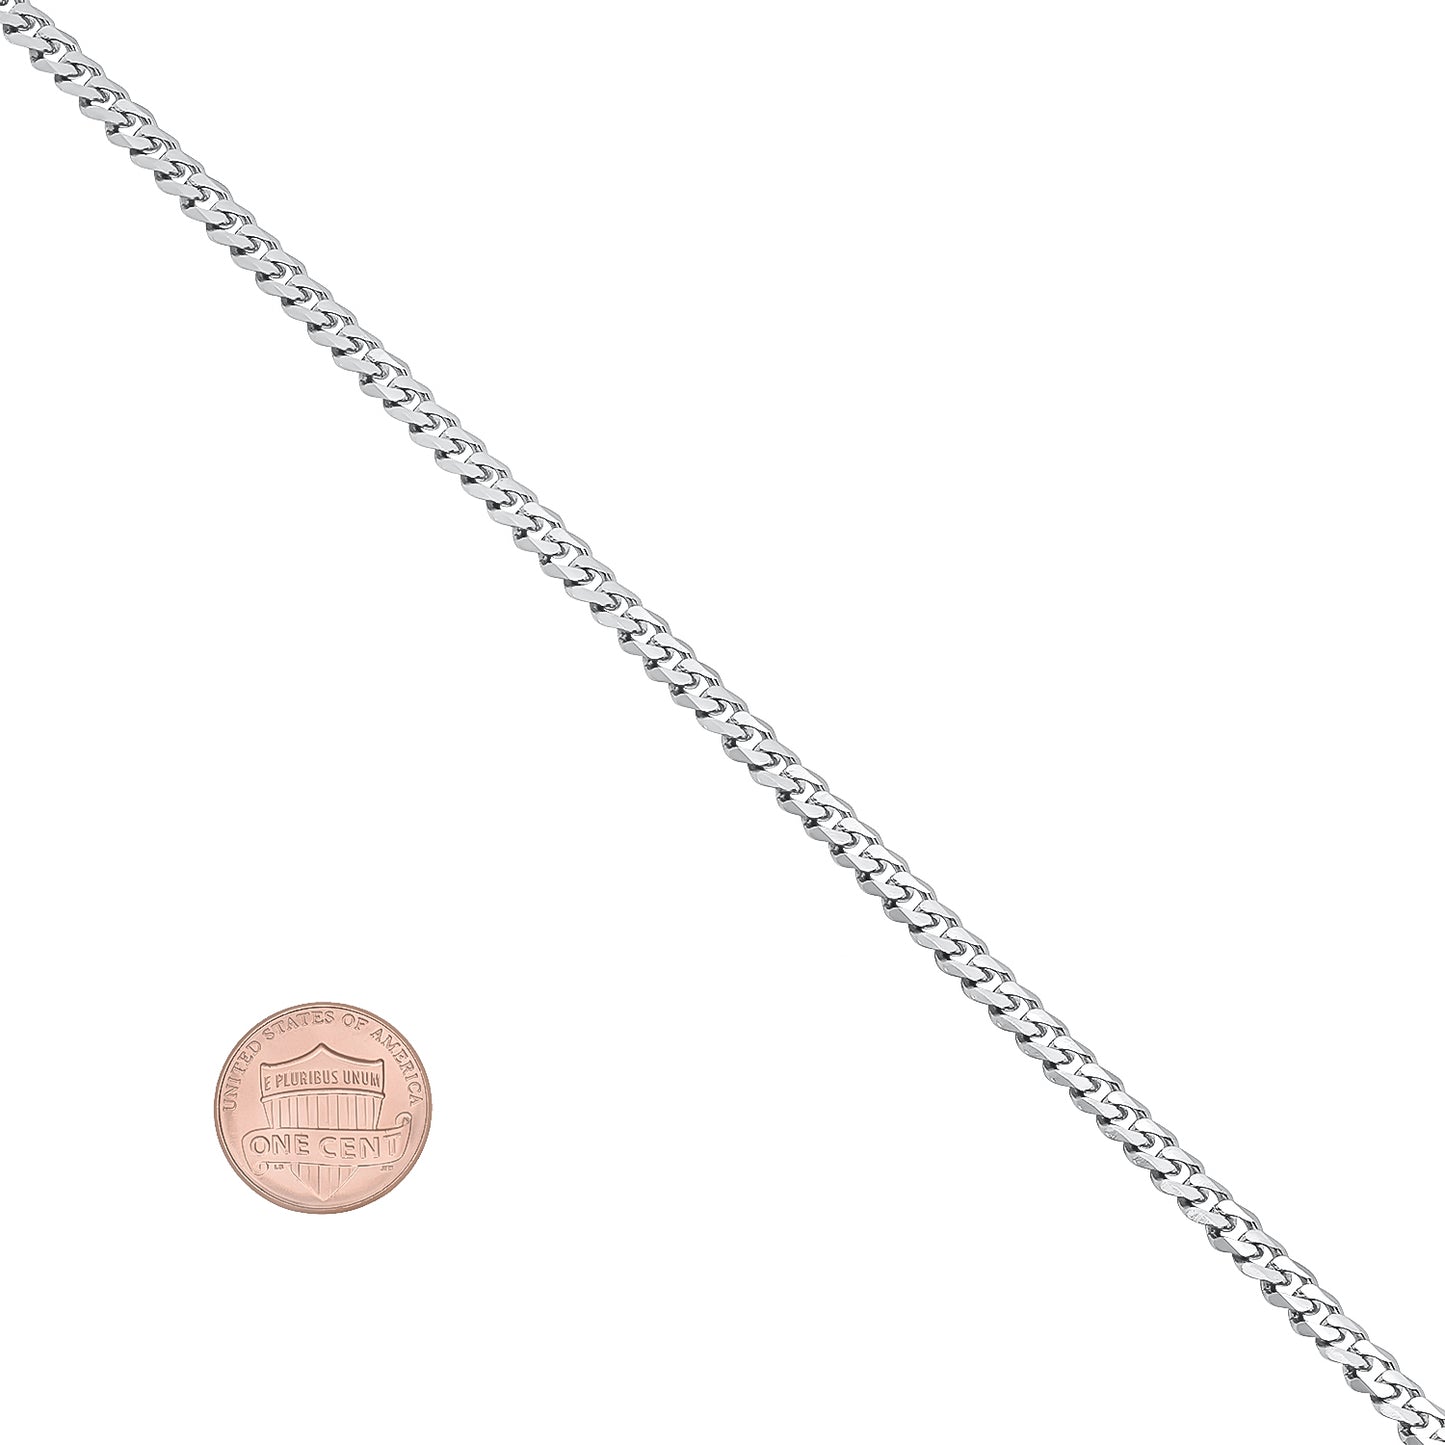 3.5mm High-Polished Stainless Steel Beveled Curb Chain Necklace, 20'-30' (SKU: ST-SSCRB100)